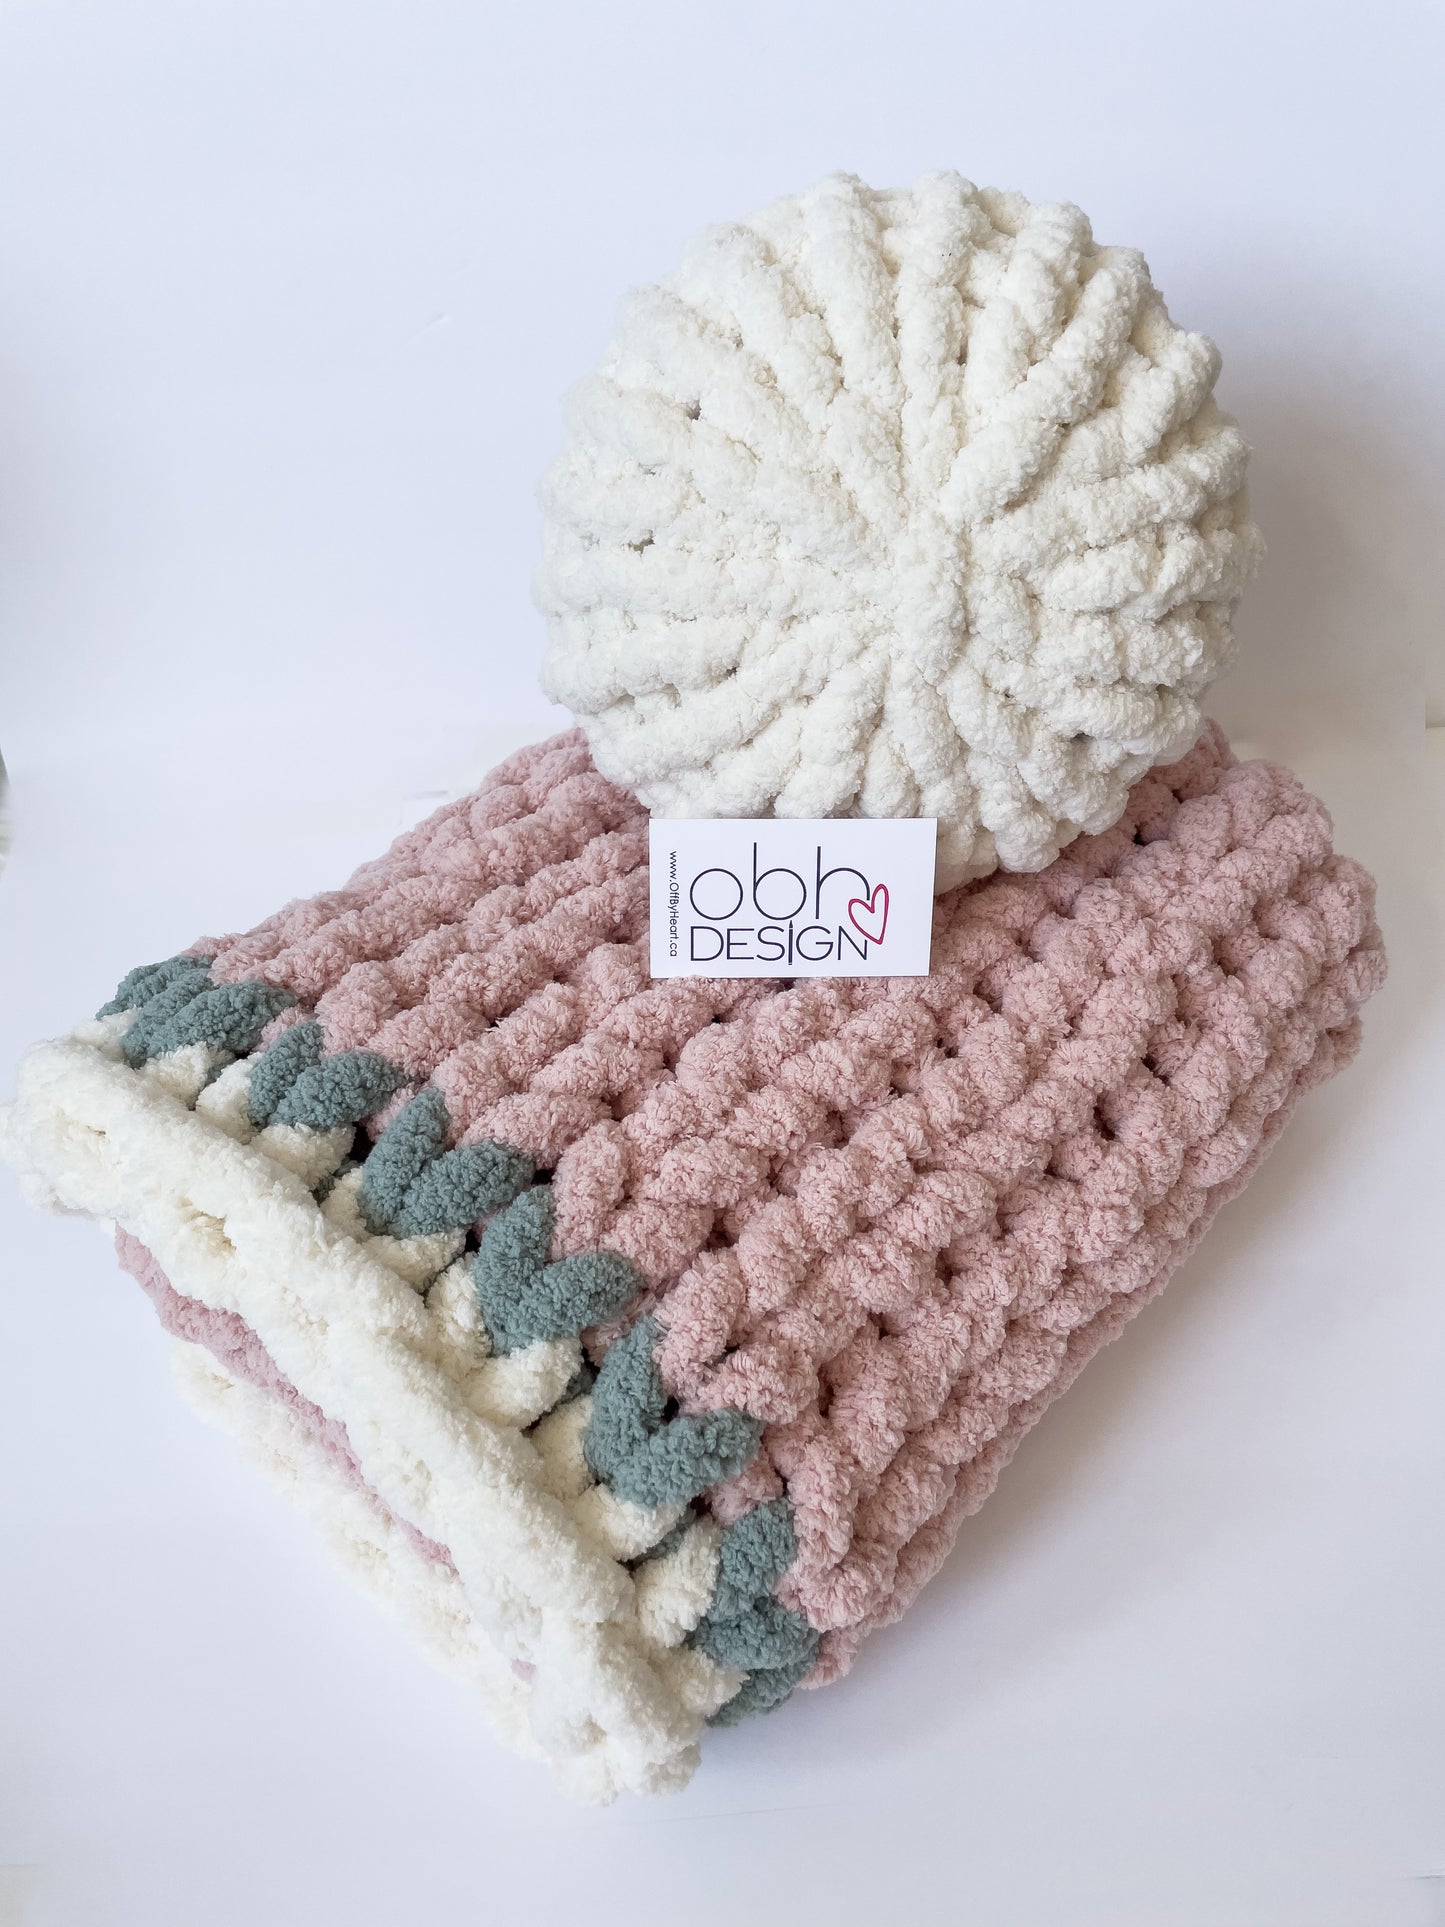 Healing Hand, Chunky Knit Baby Blankets - Soft Pink with White Pillow Set